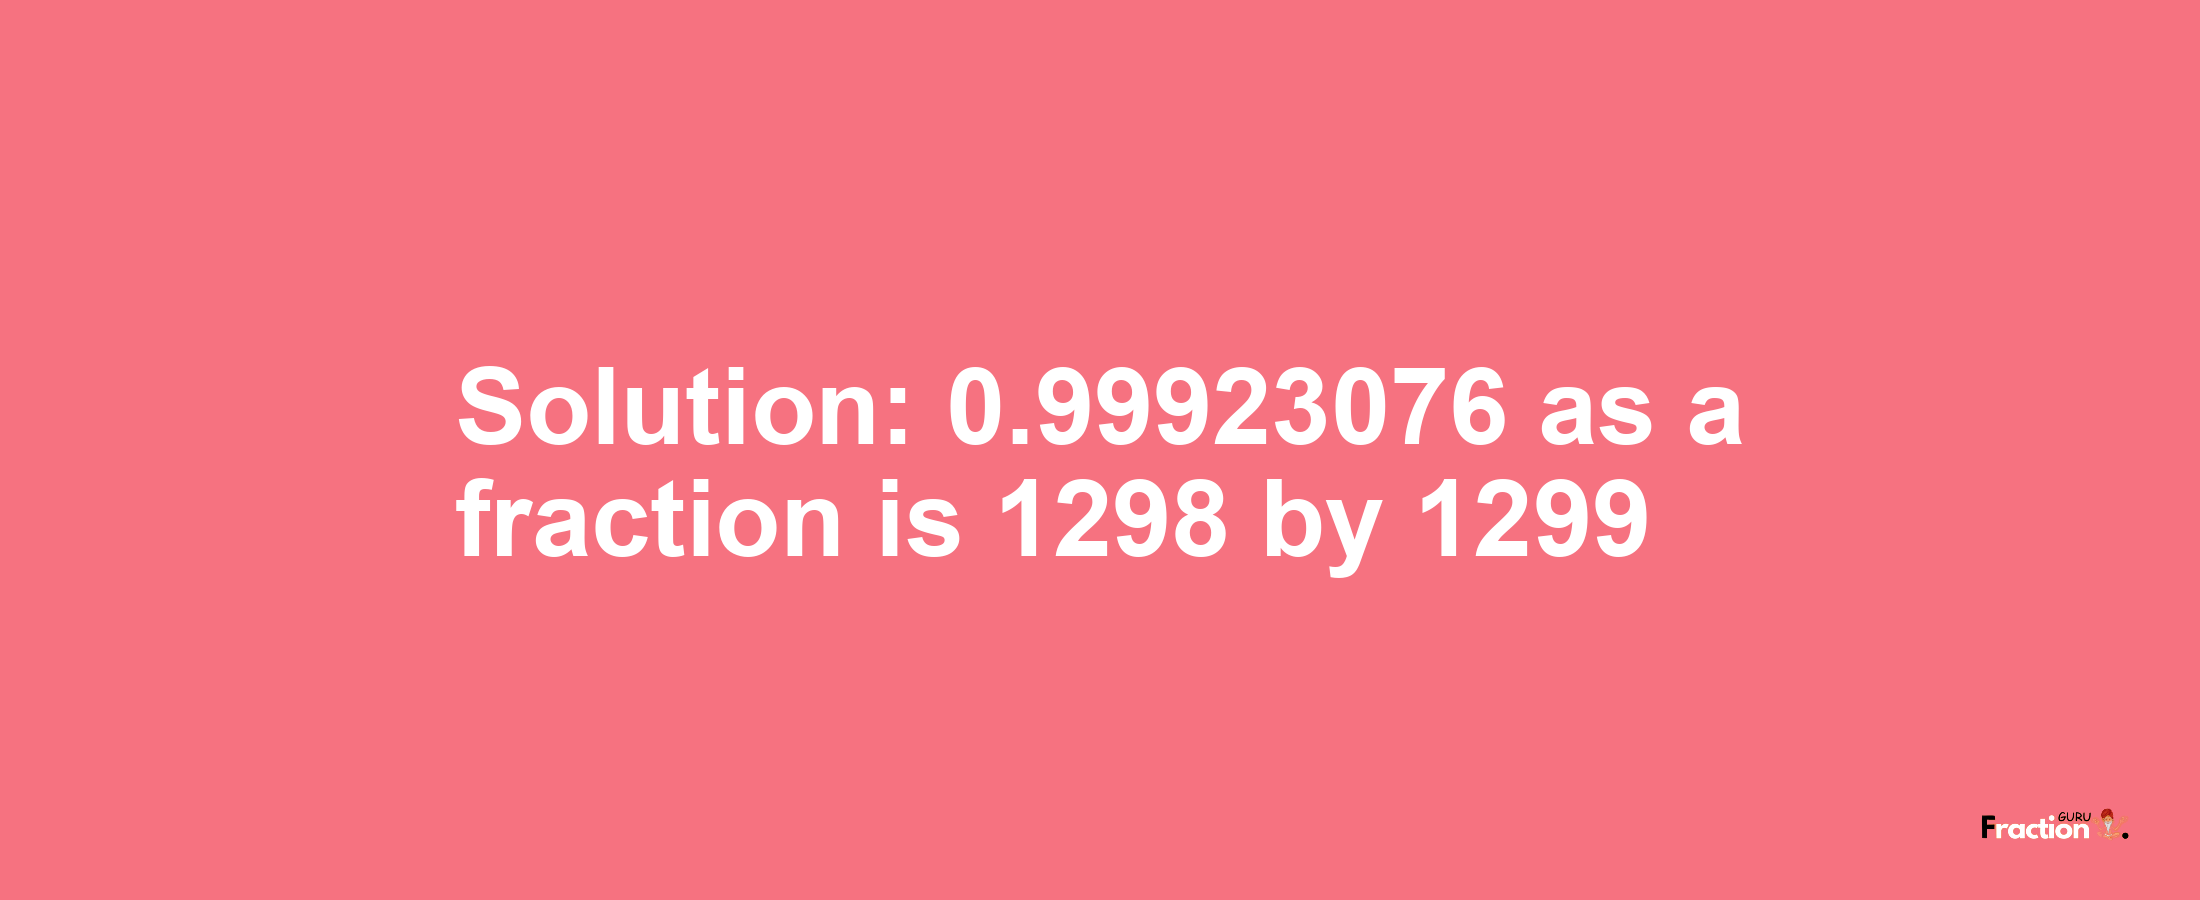 Solution:0.99923076 as a fraction is 1298/1299